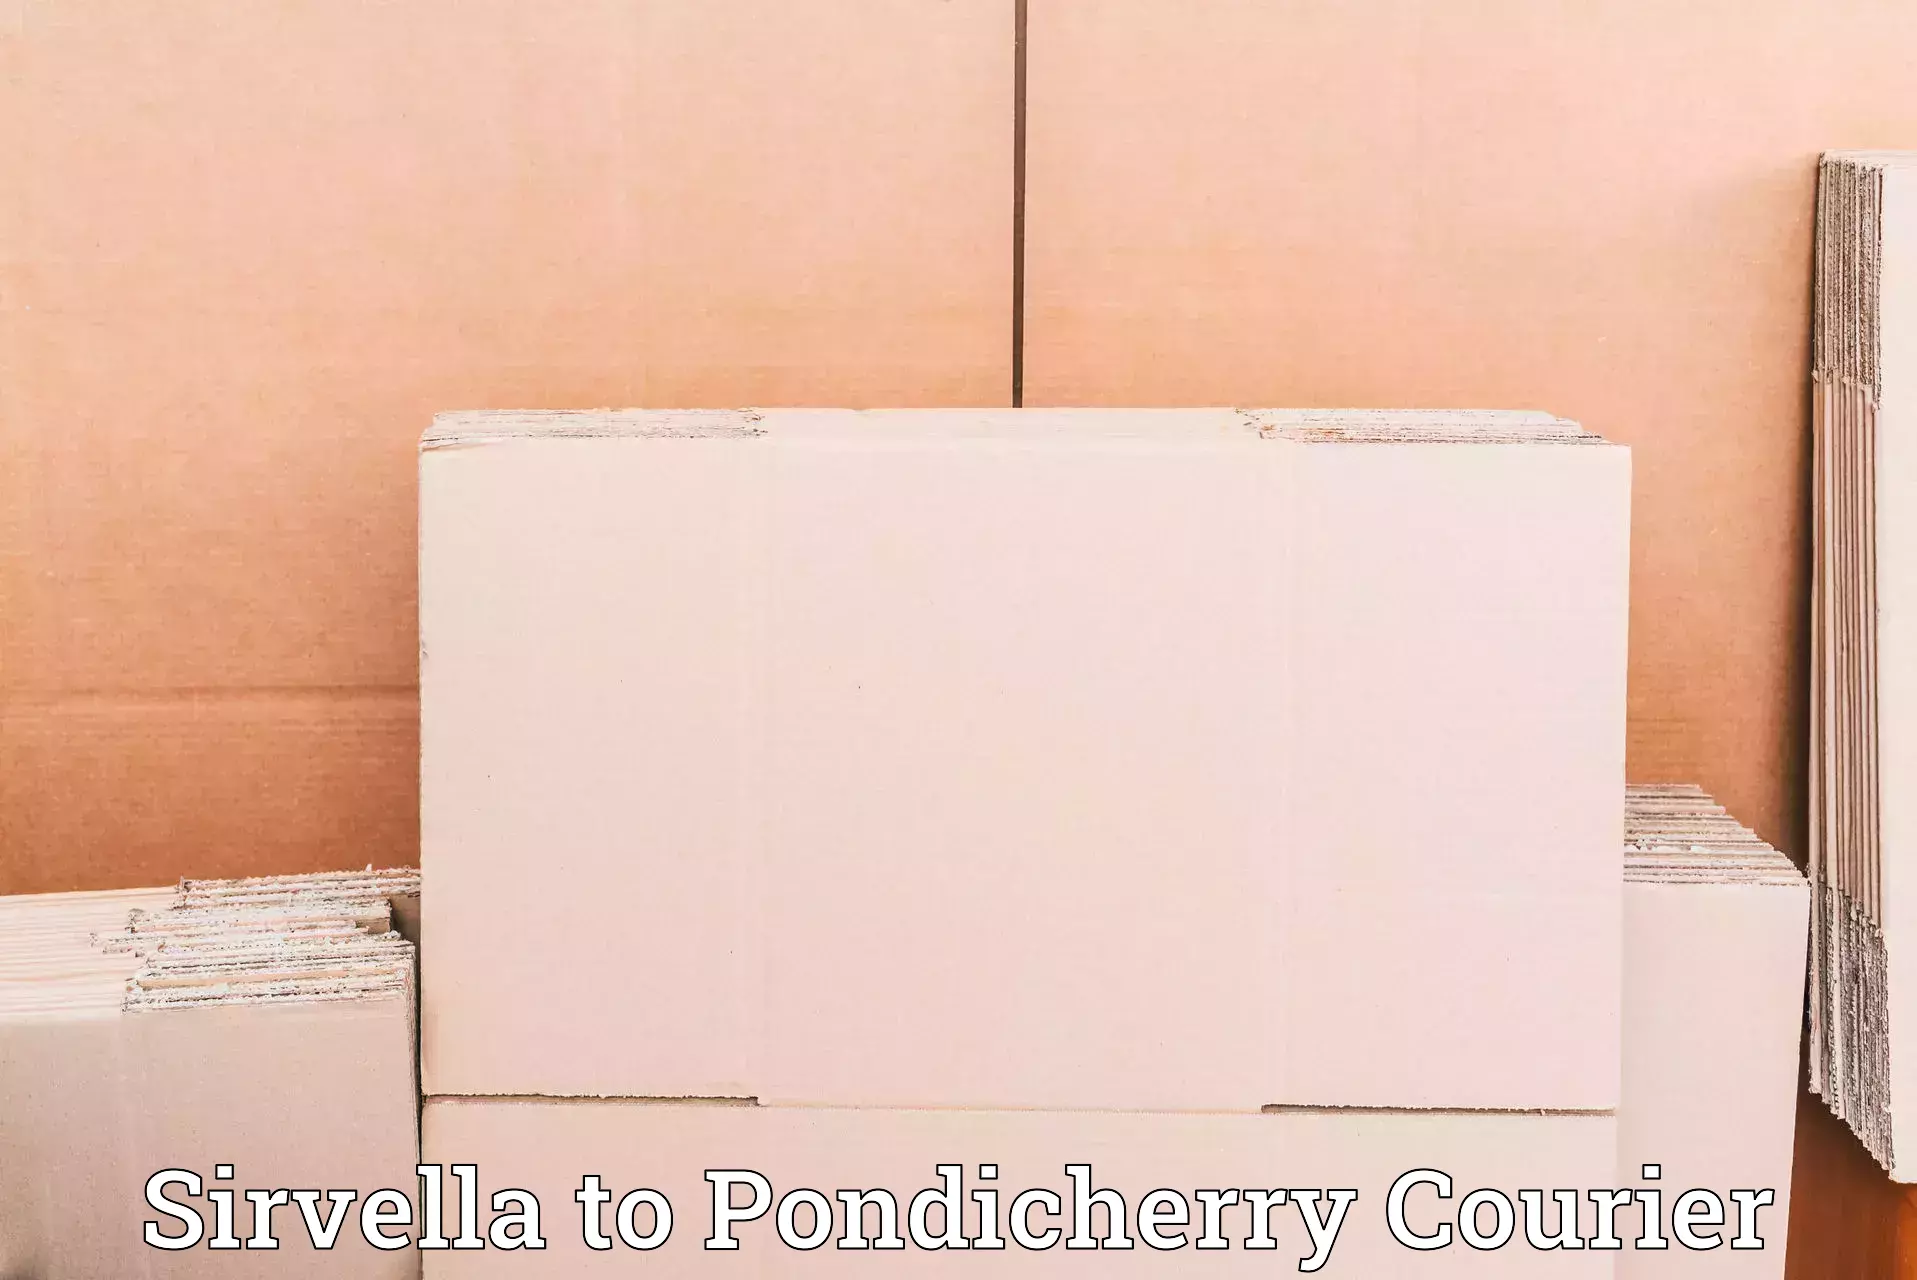 Multi-service courier options Sirvella to Pondicherry